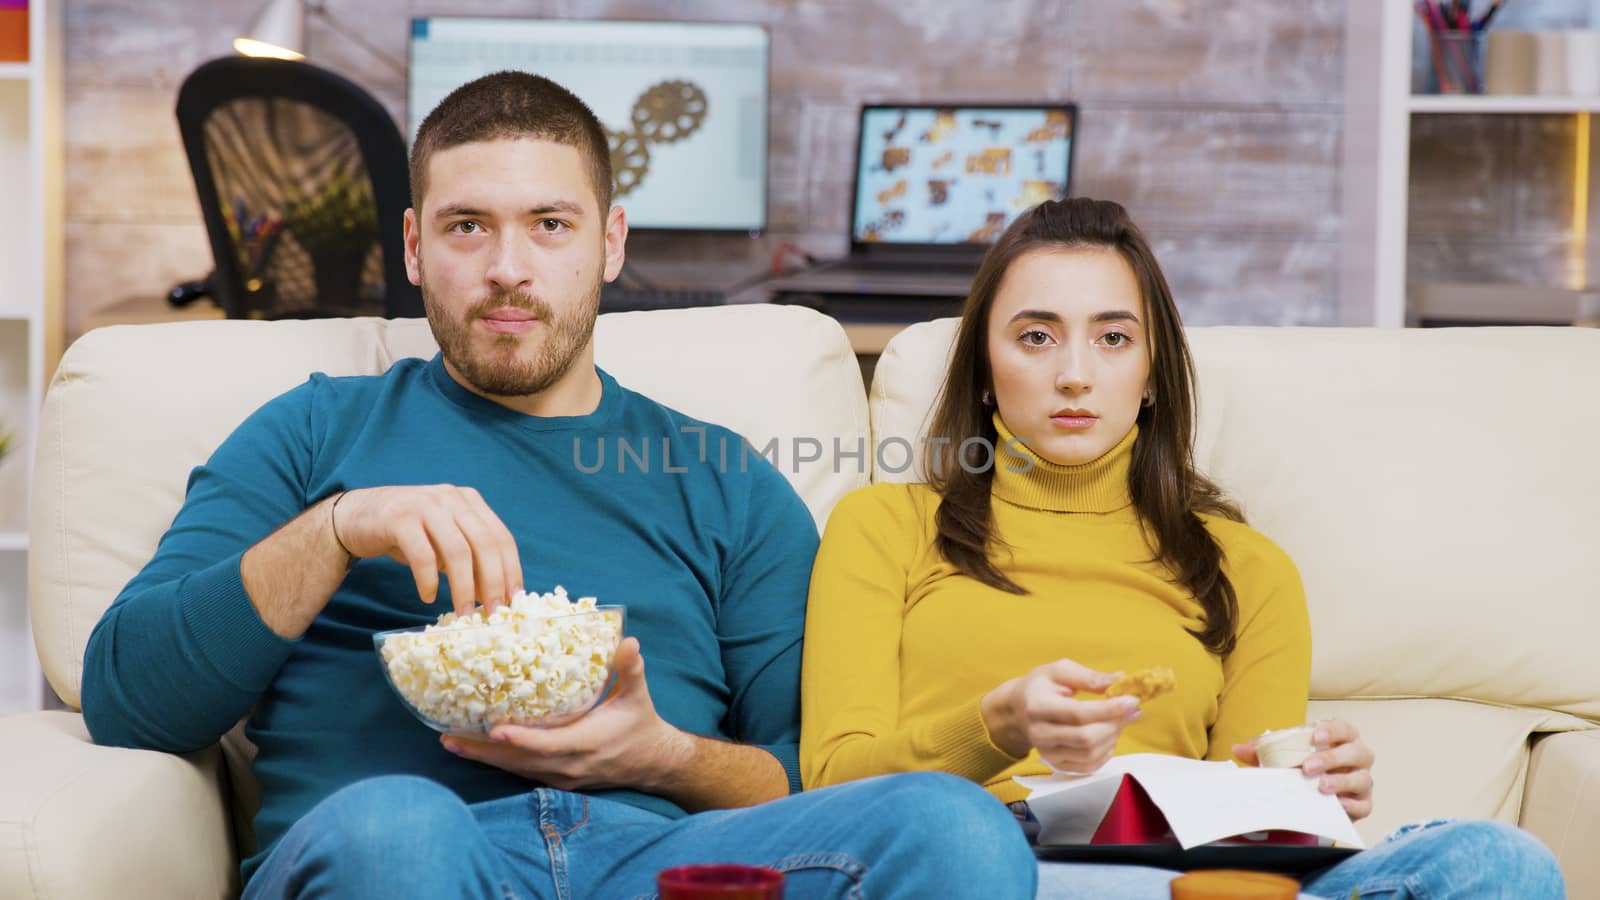 Scared couple watching tv eating pizza and popcorn sitting on couch. Couple eating junk food.